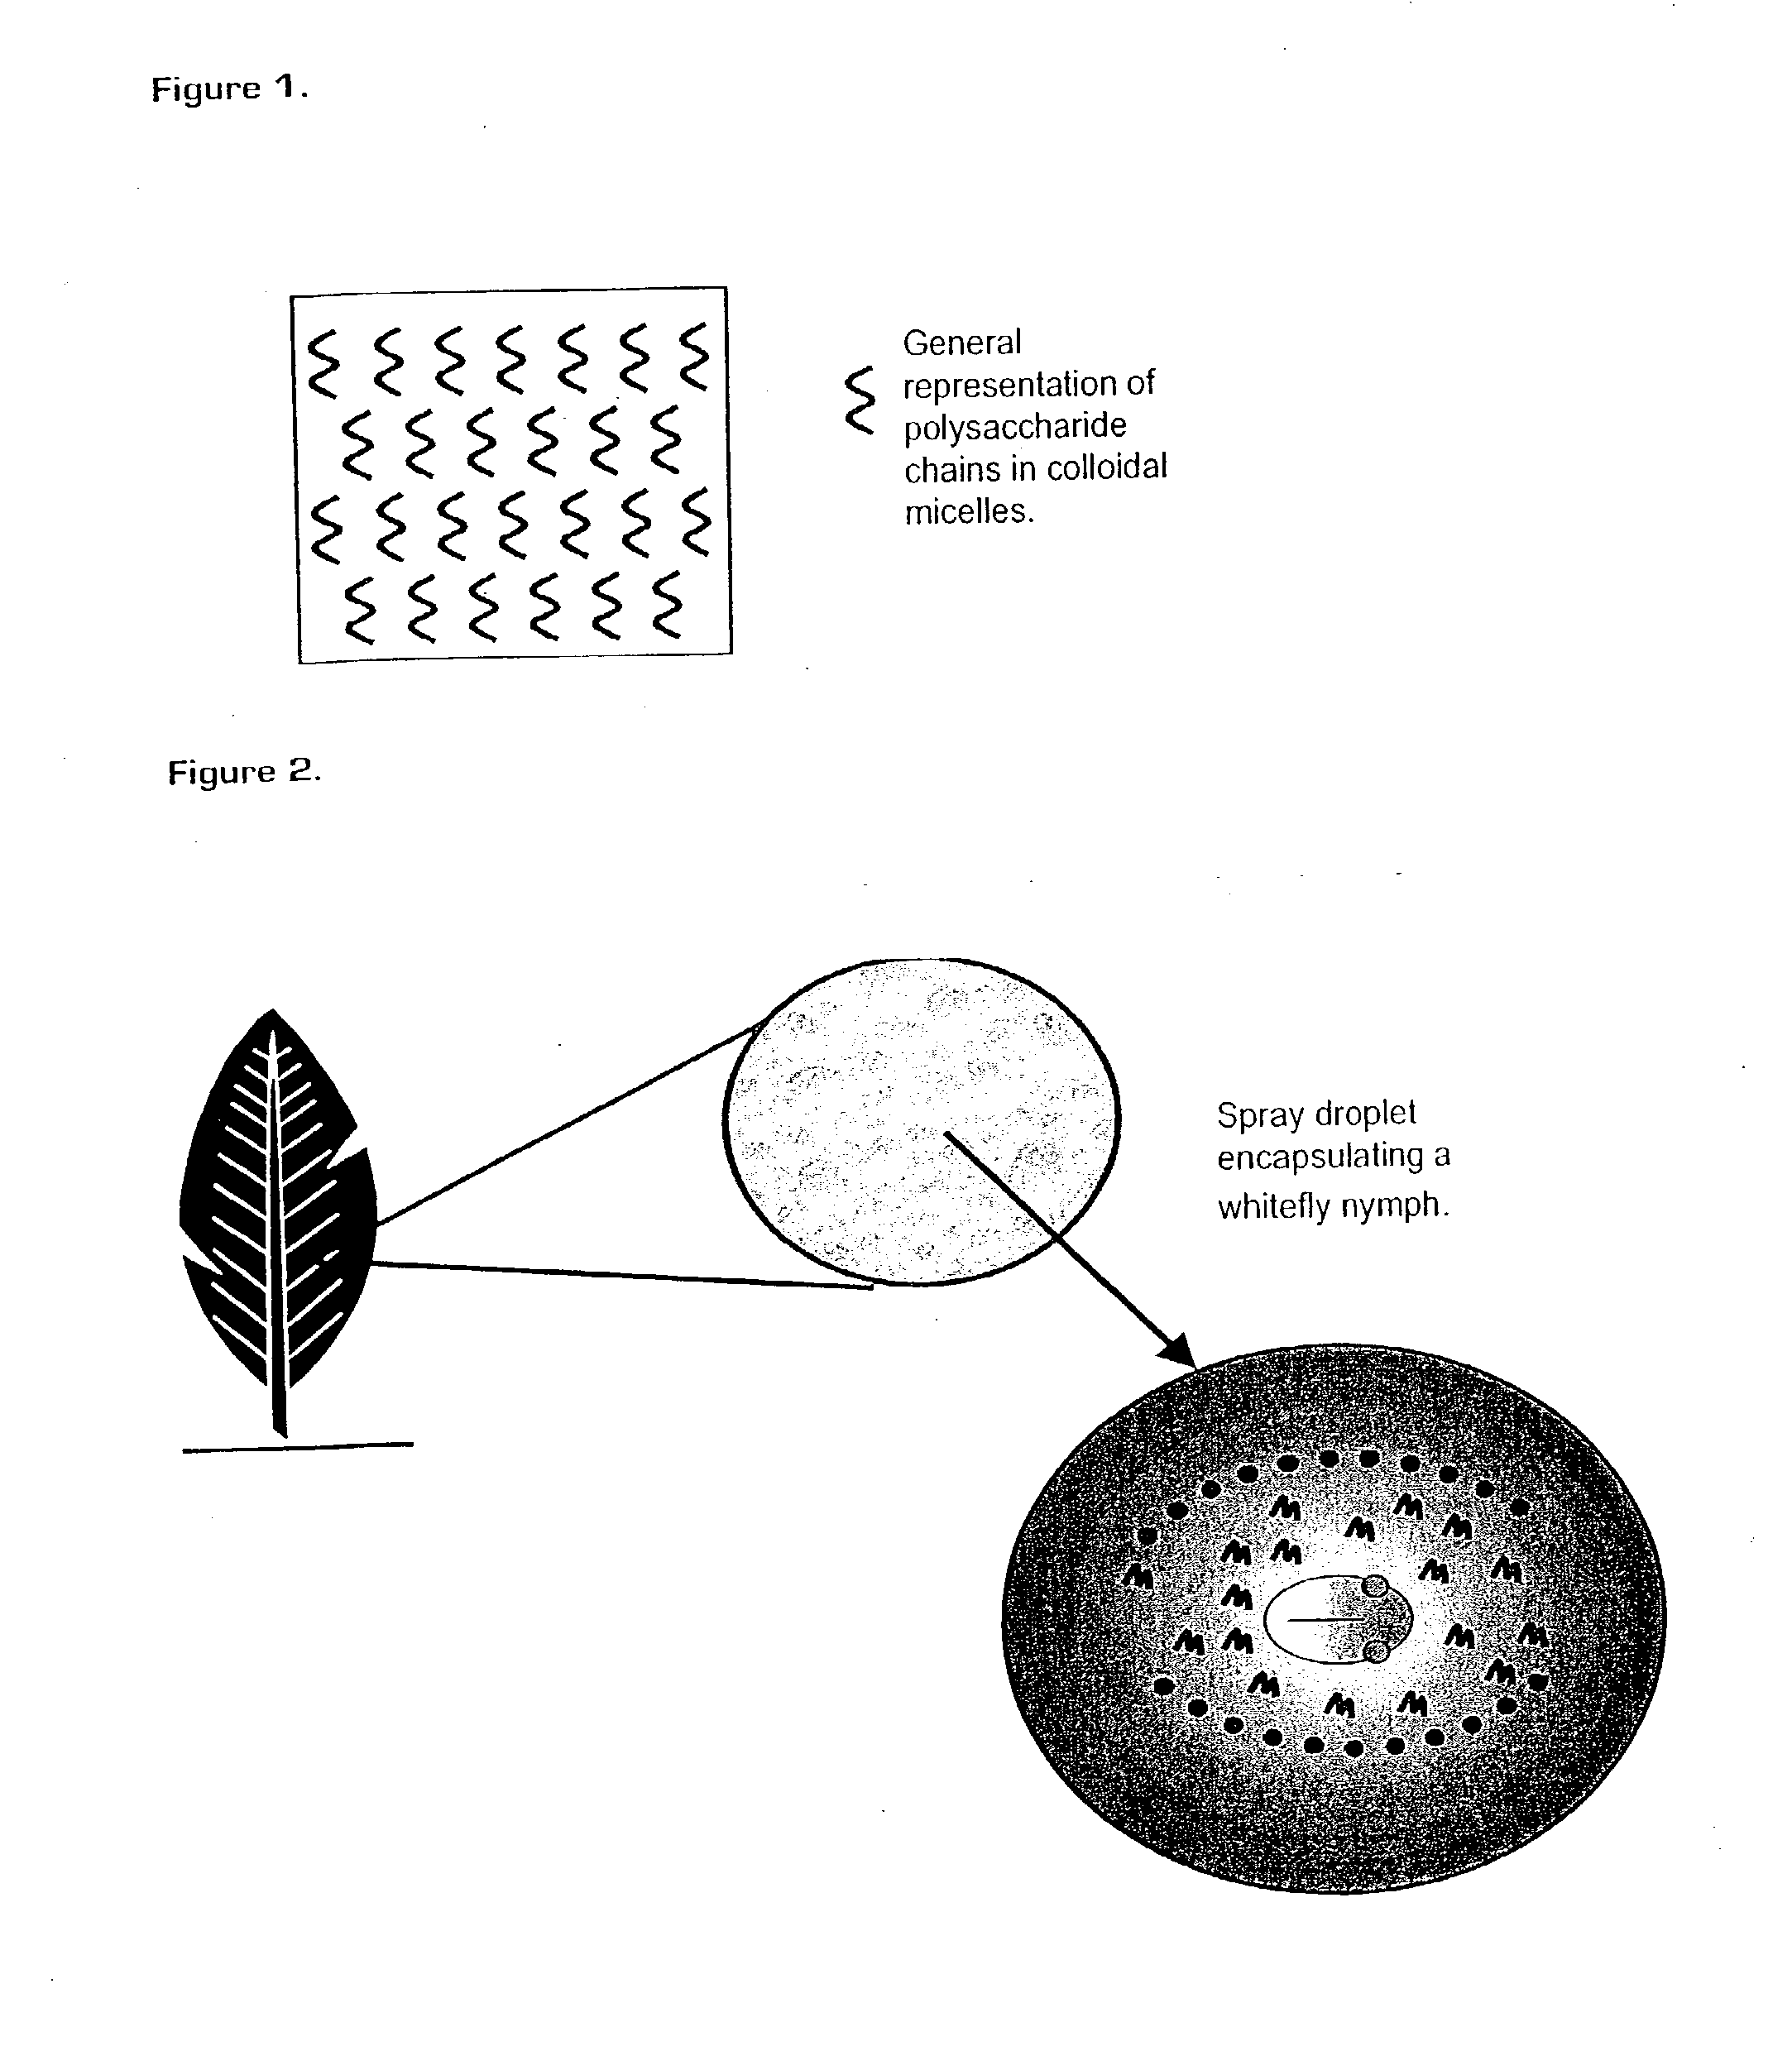 Physical Mode of Action Pesticide